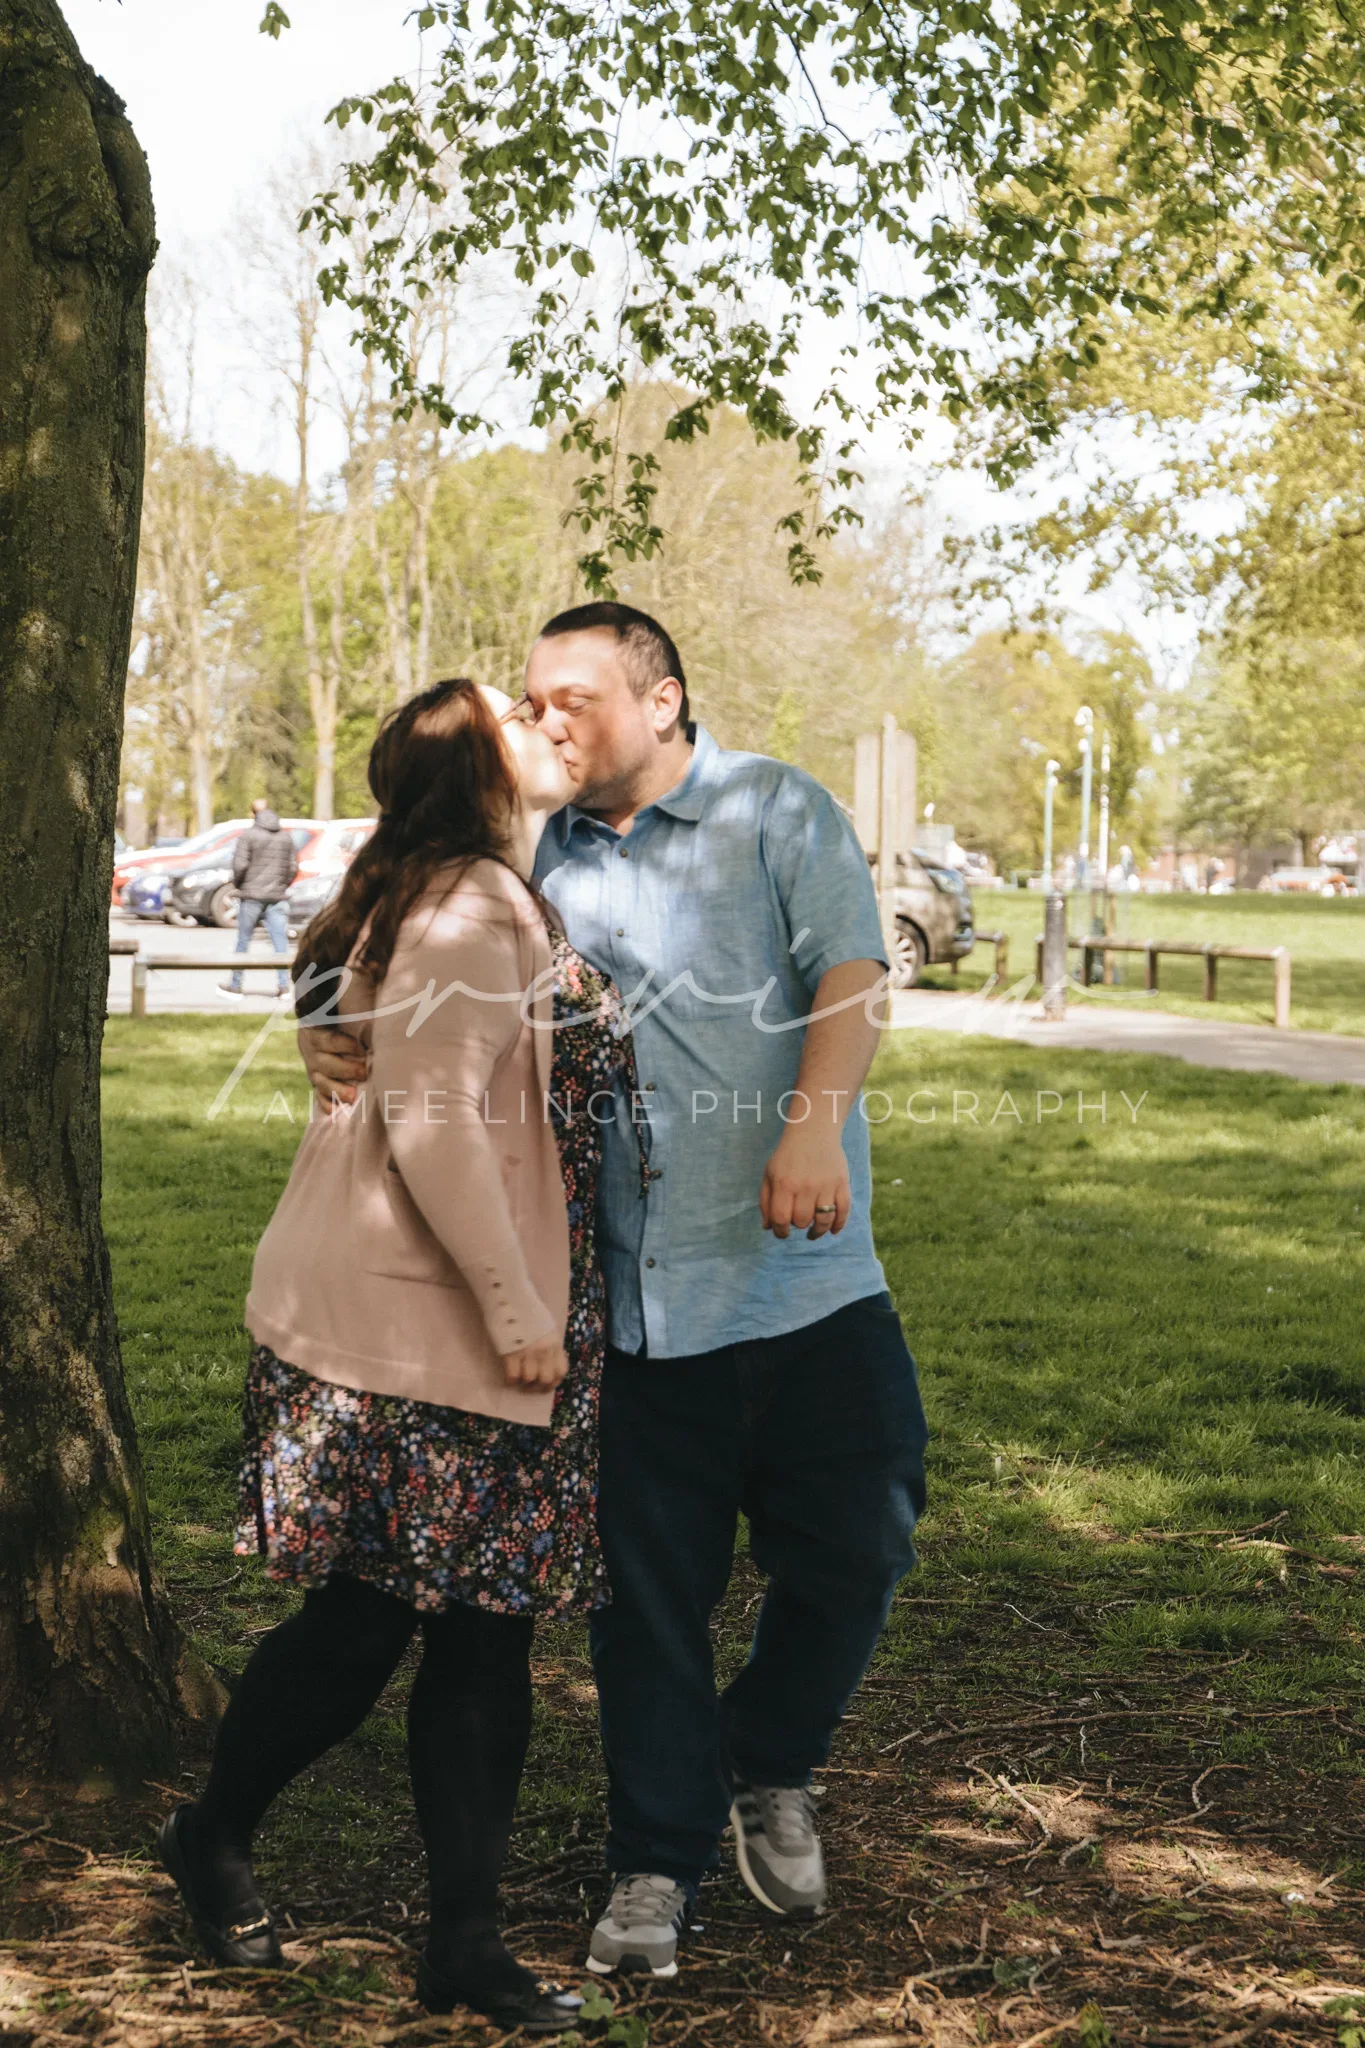 A couple shares a kiss under a tree in a sunny park setting during their wedding photography session. The woman, wearing a floral dress and black leggings, embraces a man in a blue shirt and jeans.